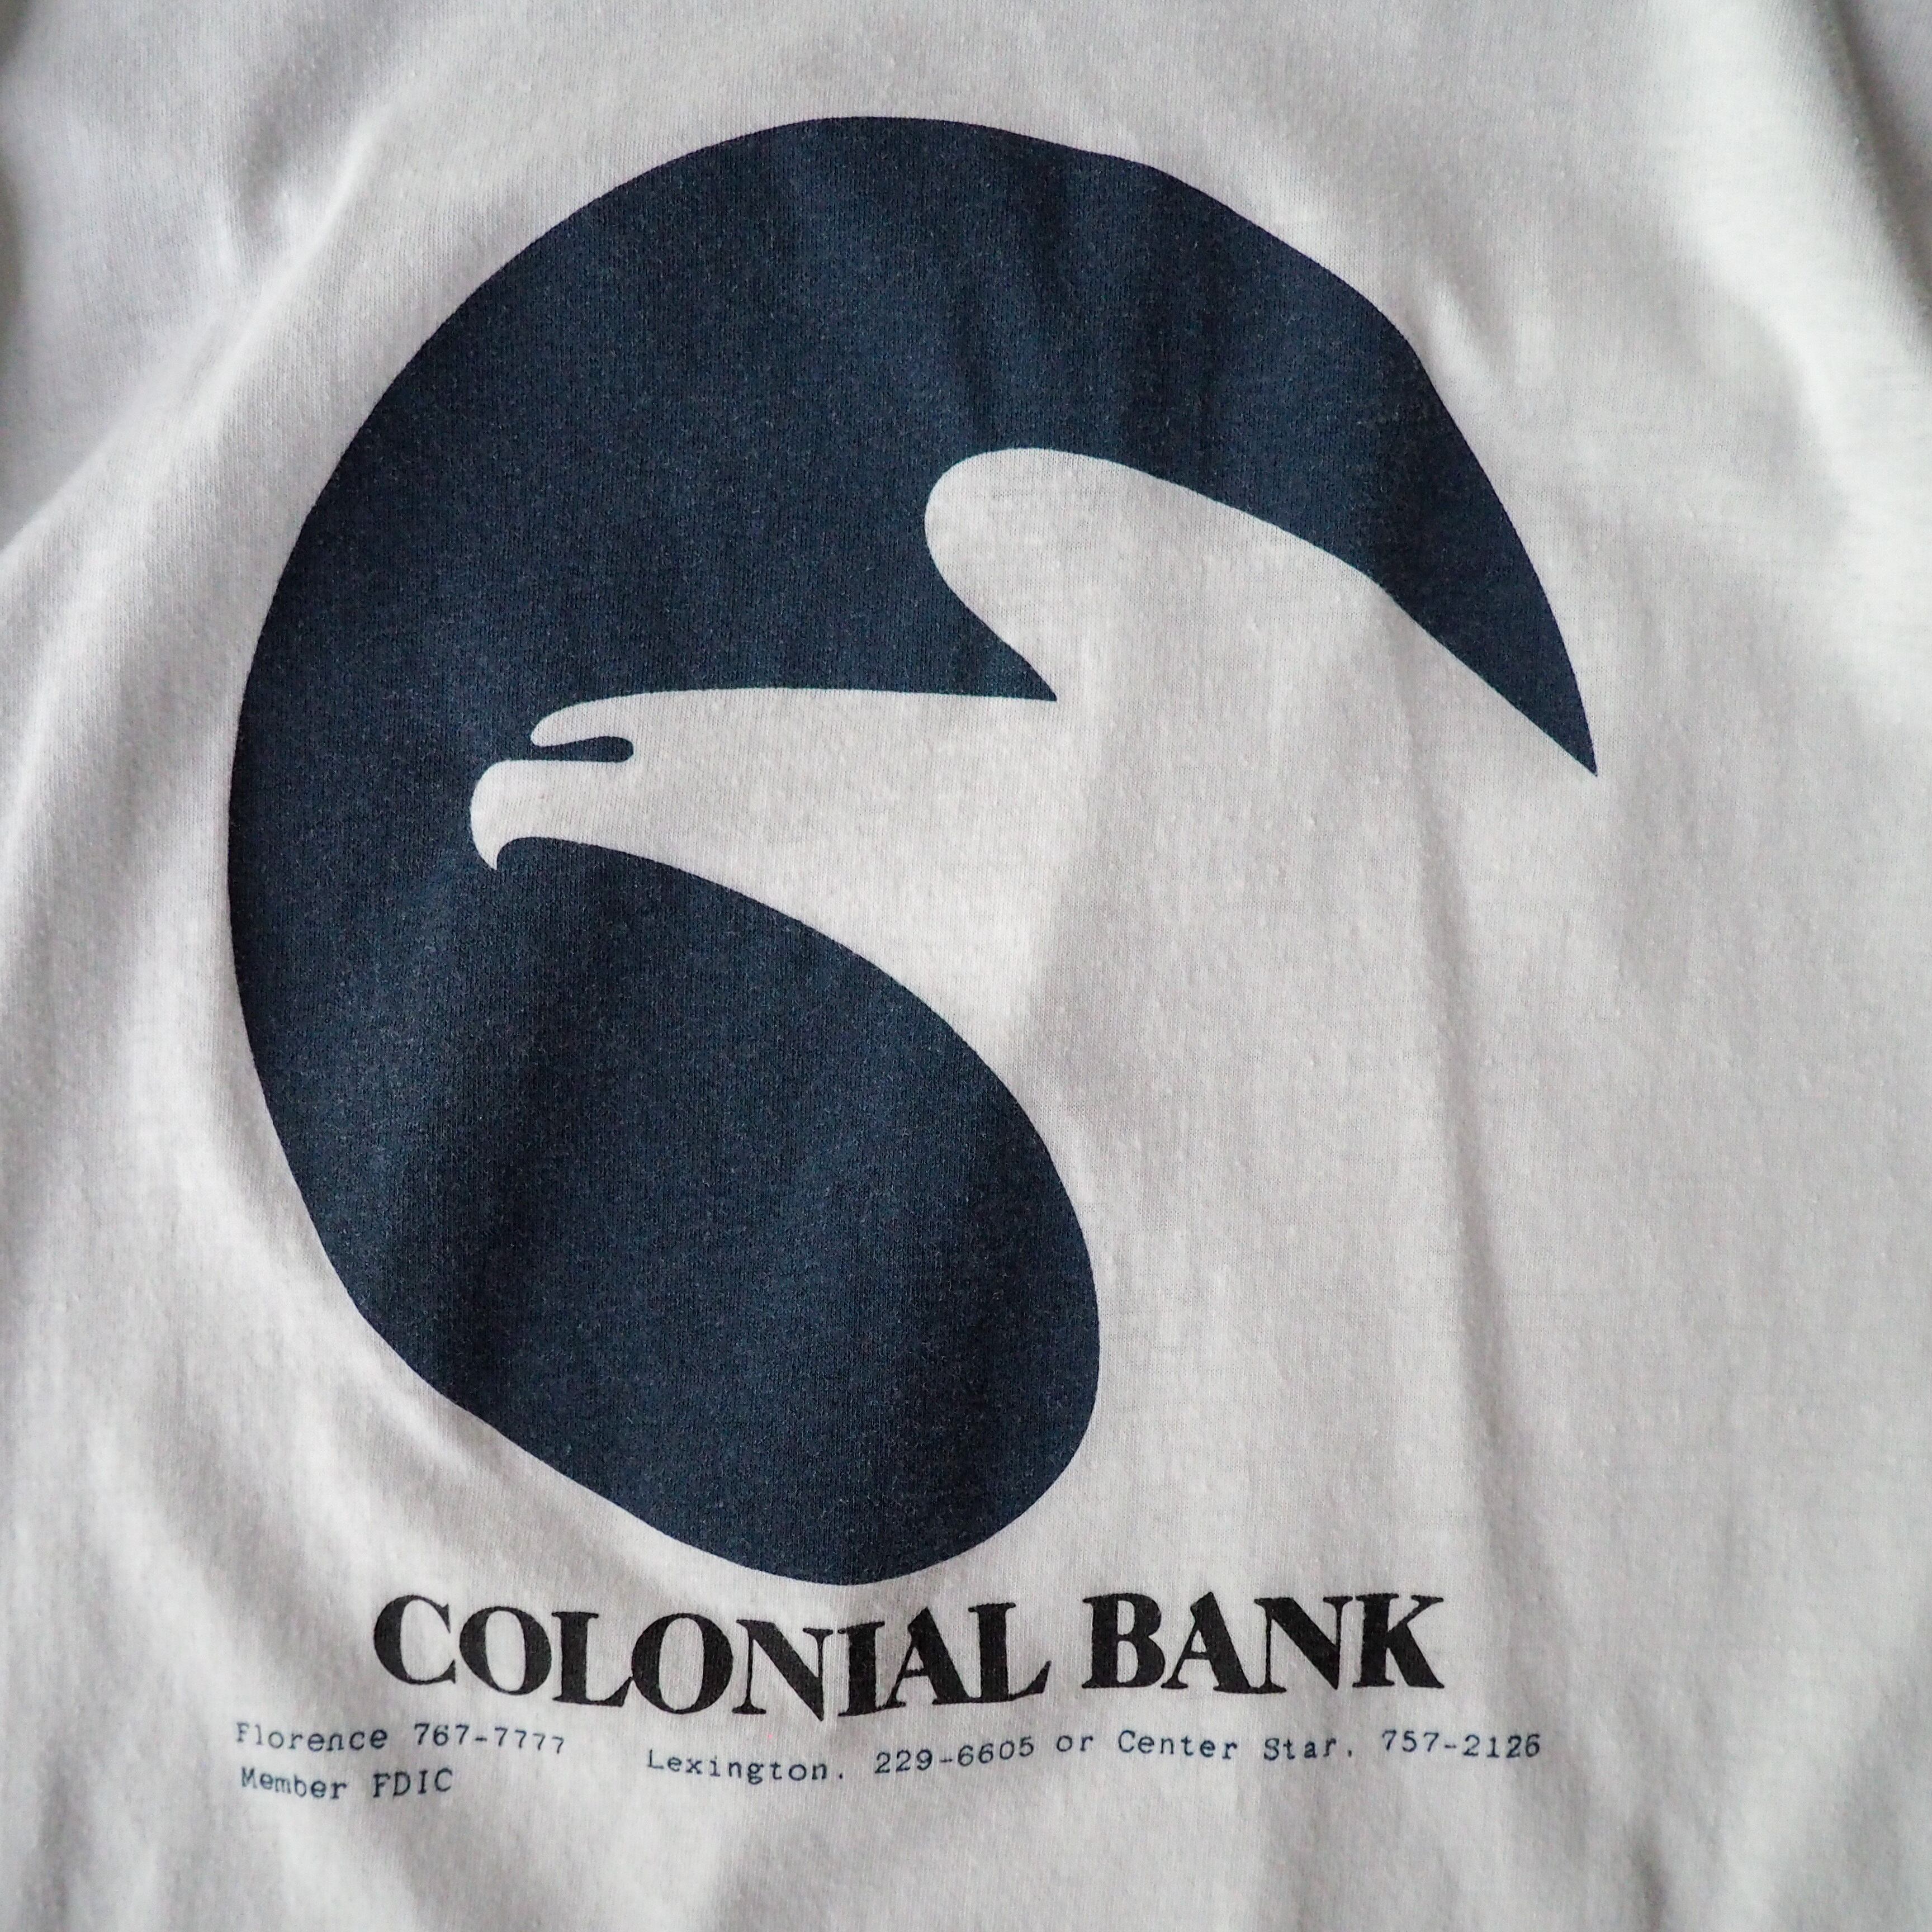 80s “Colonial Bank” tee made in USA コロニアル銀行 リーマン